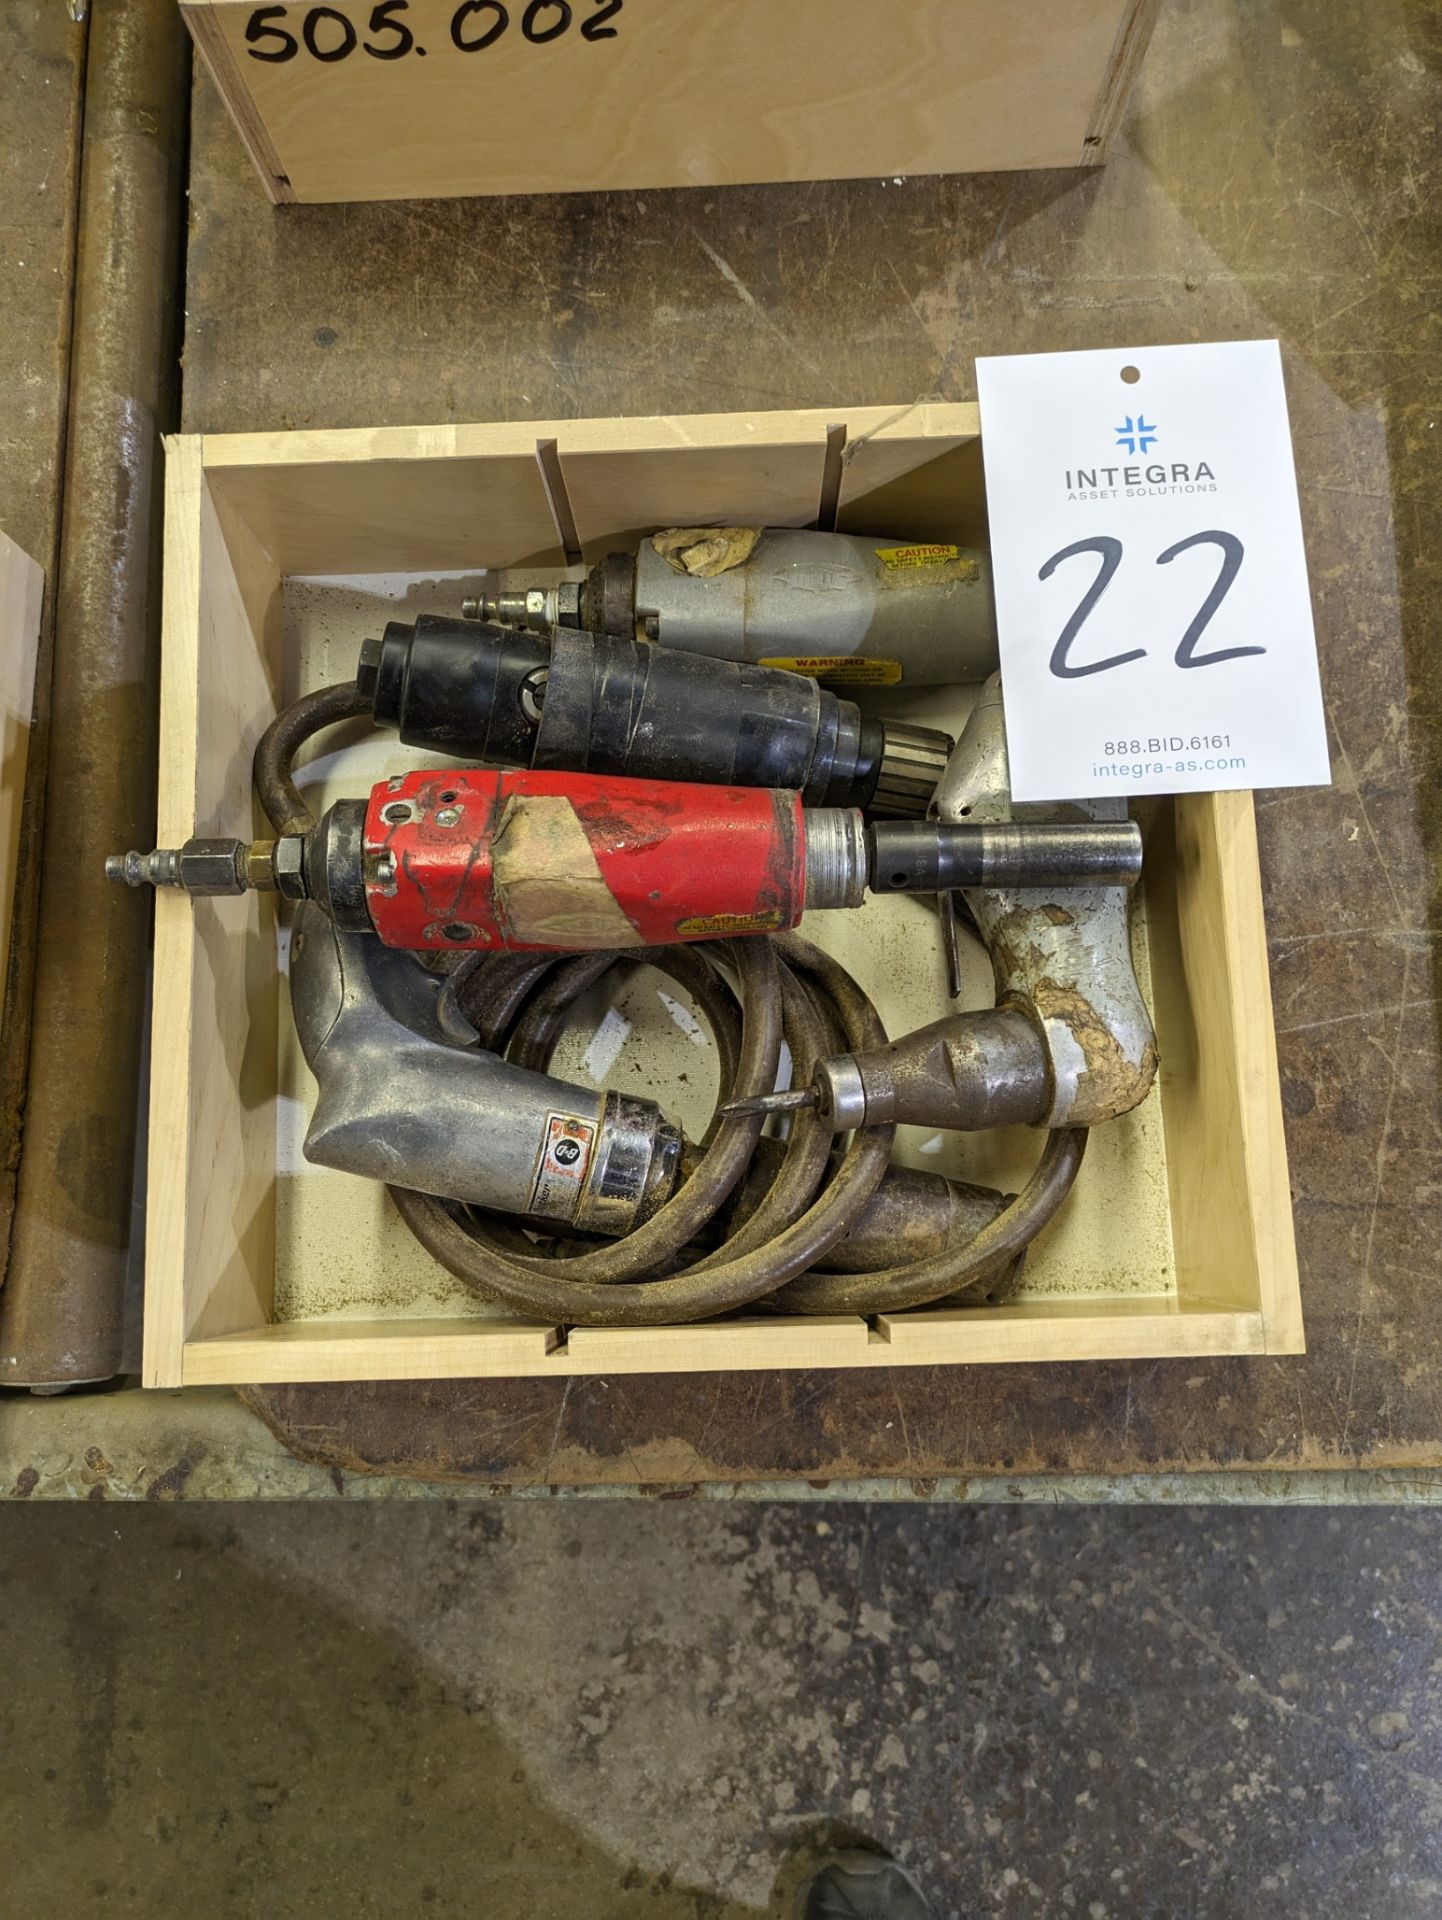 Lot of (5) Assorted Air Tools